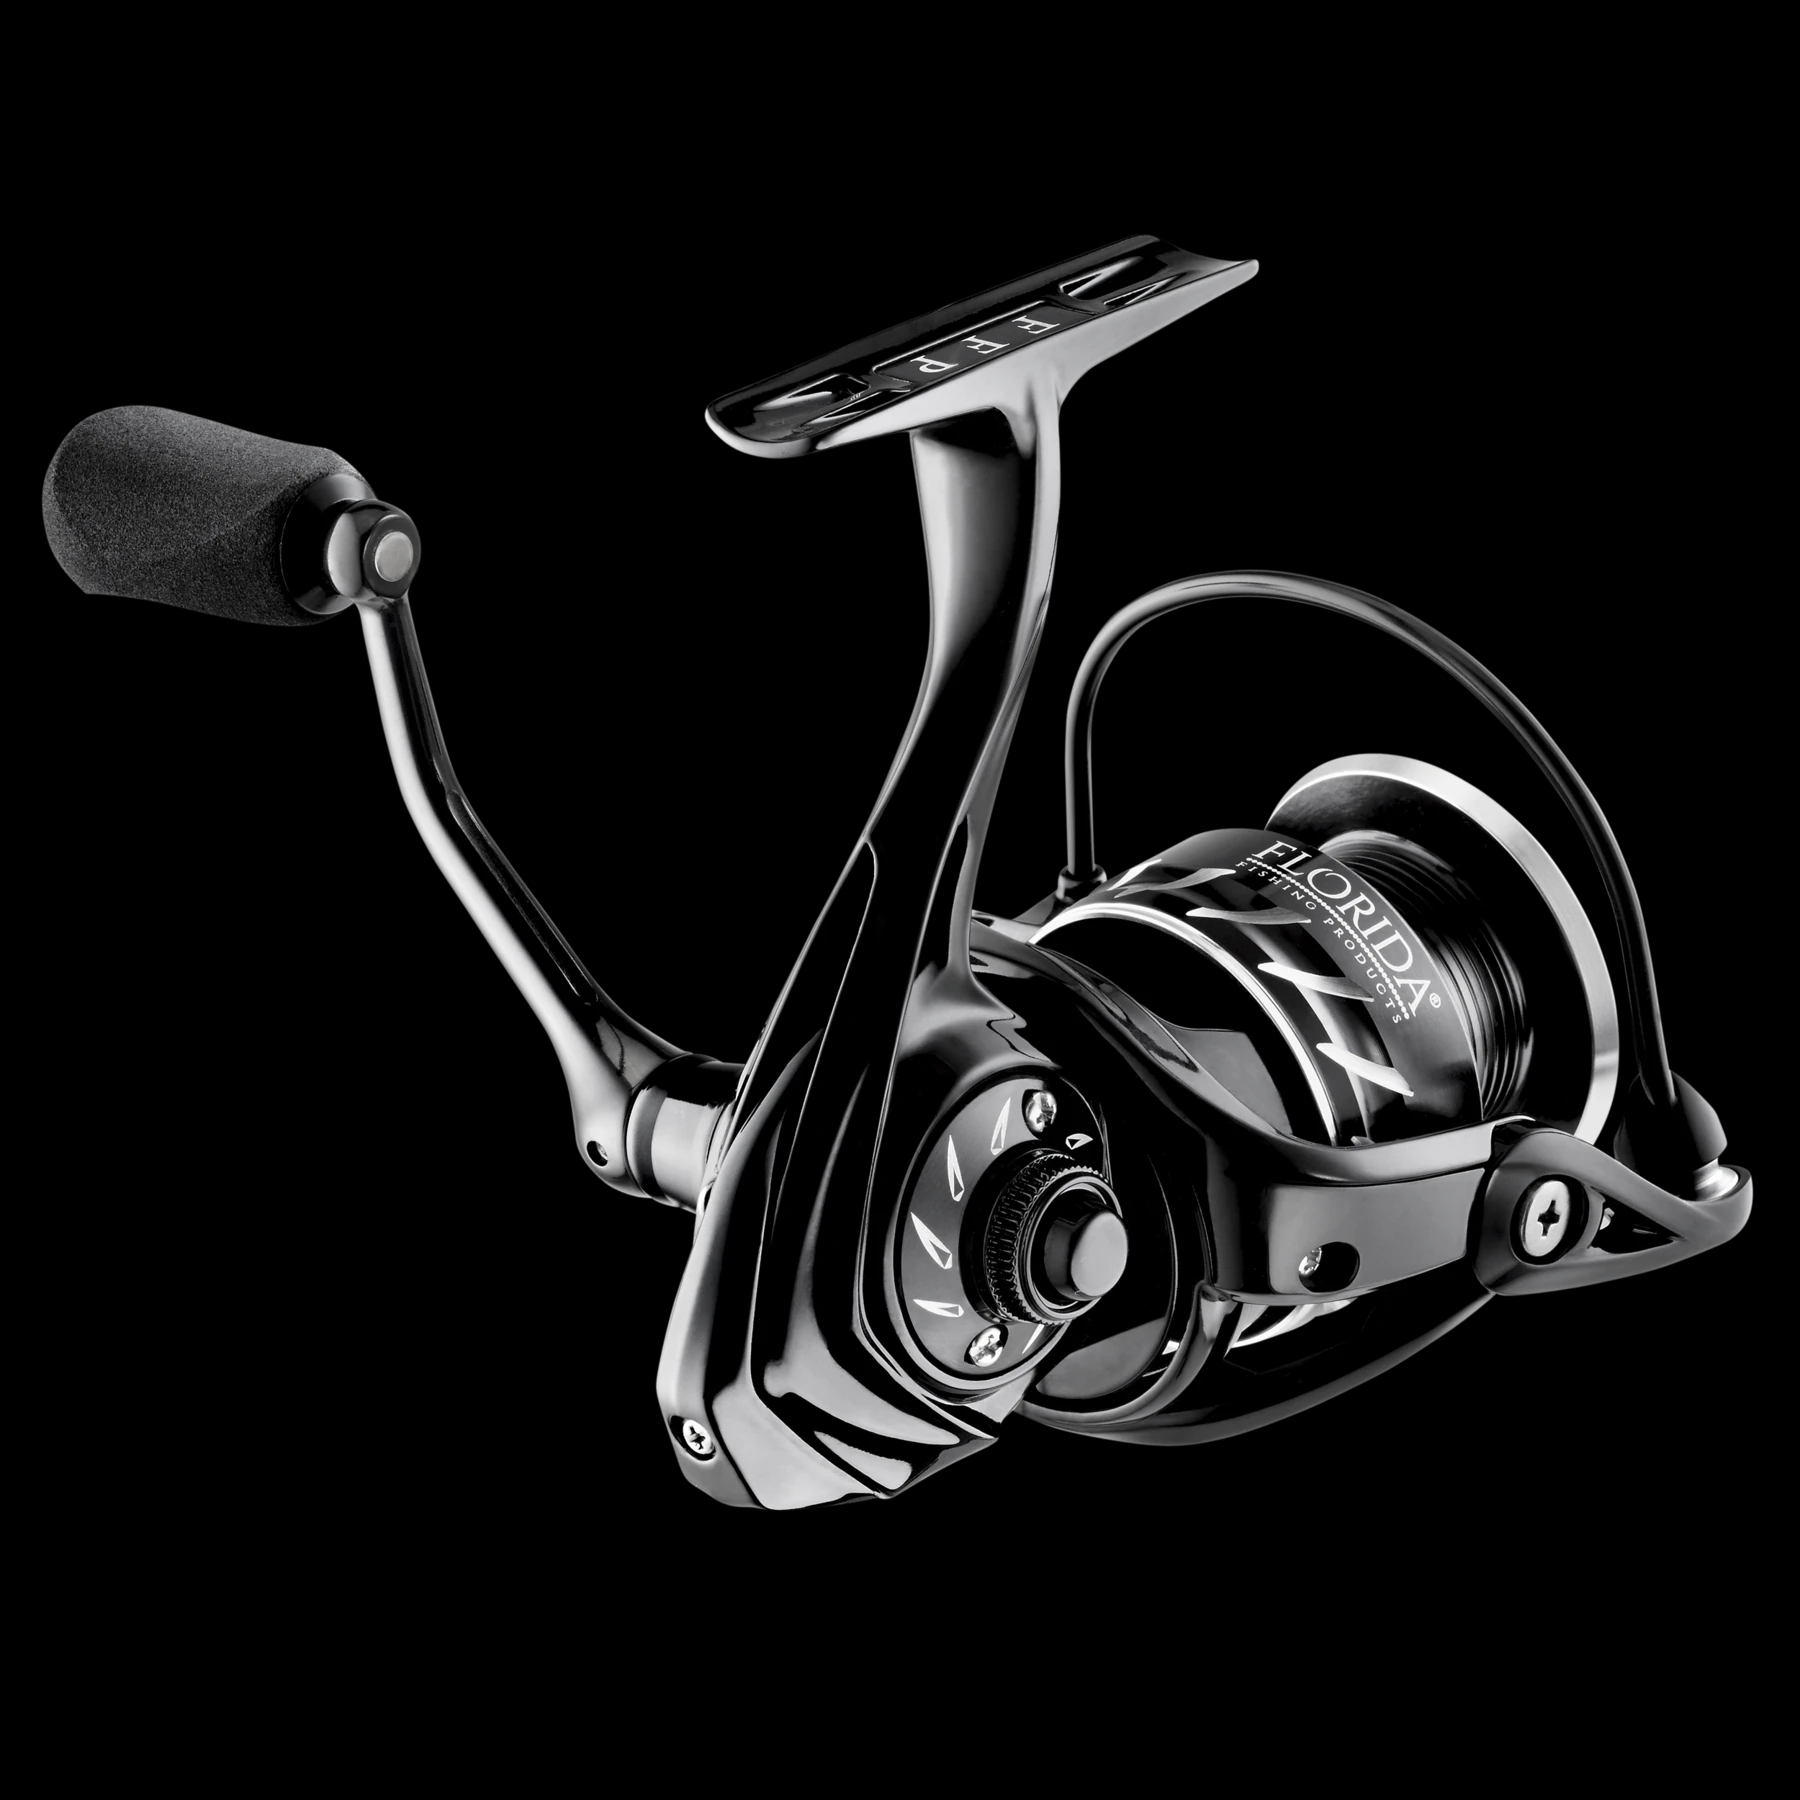 Florida Fishing Products Osprey Carbon Edition 1000 Spinning Reel